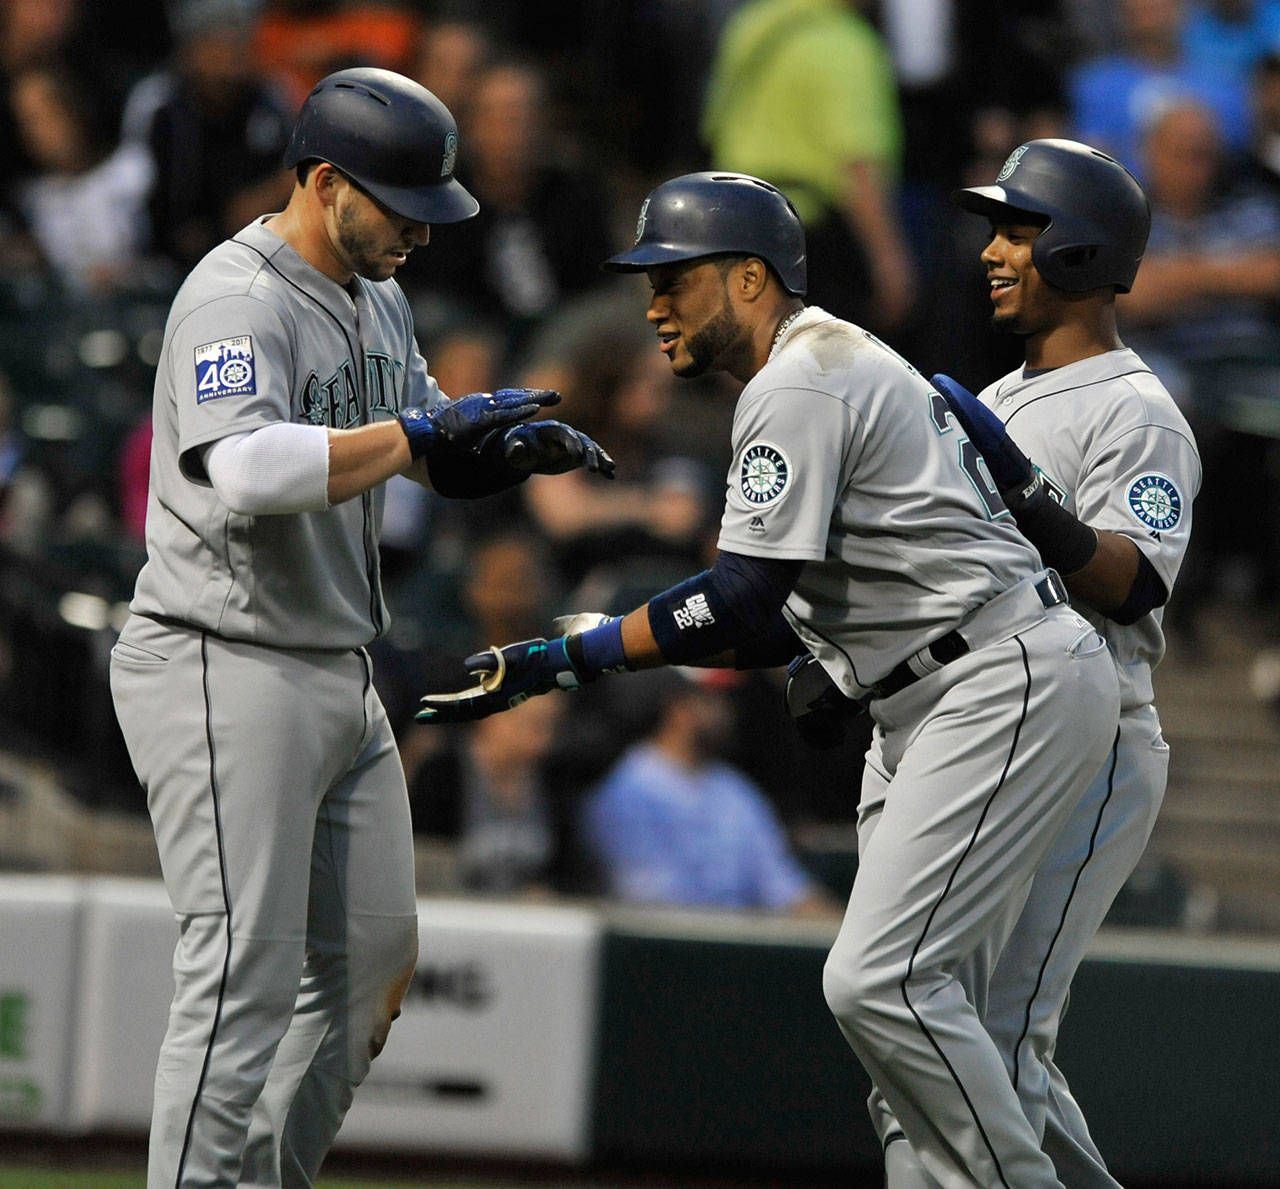 Seattle’s Robinson Cano (center) celebrates with teammates Jean Segura (right) and Mike Zunino after hitting a three-run home run in the third inning of Friday’s game in Chicago. (AP Photo/Paul Beaty)